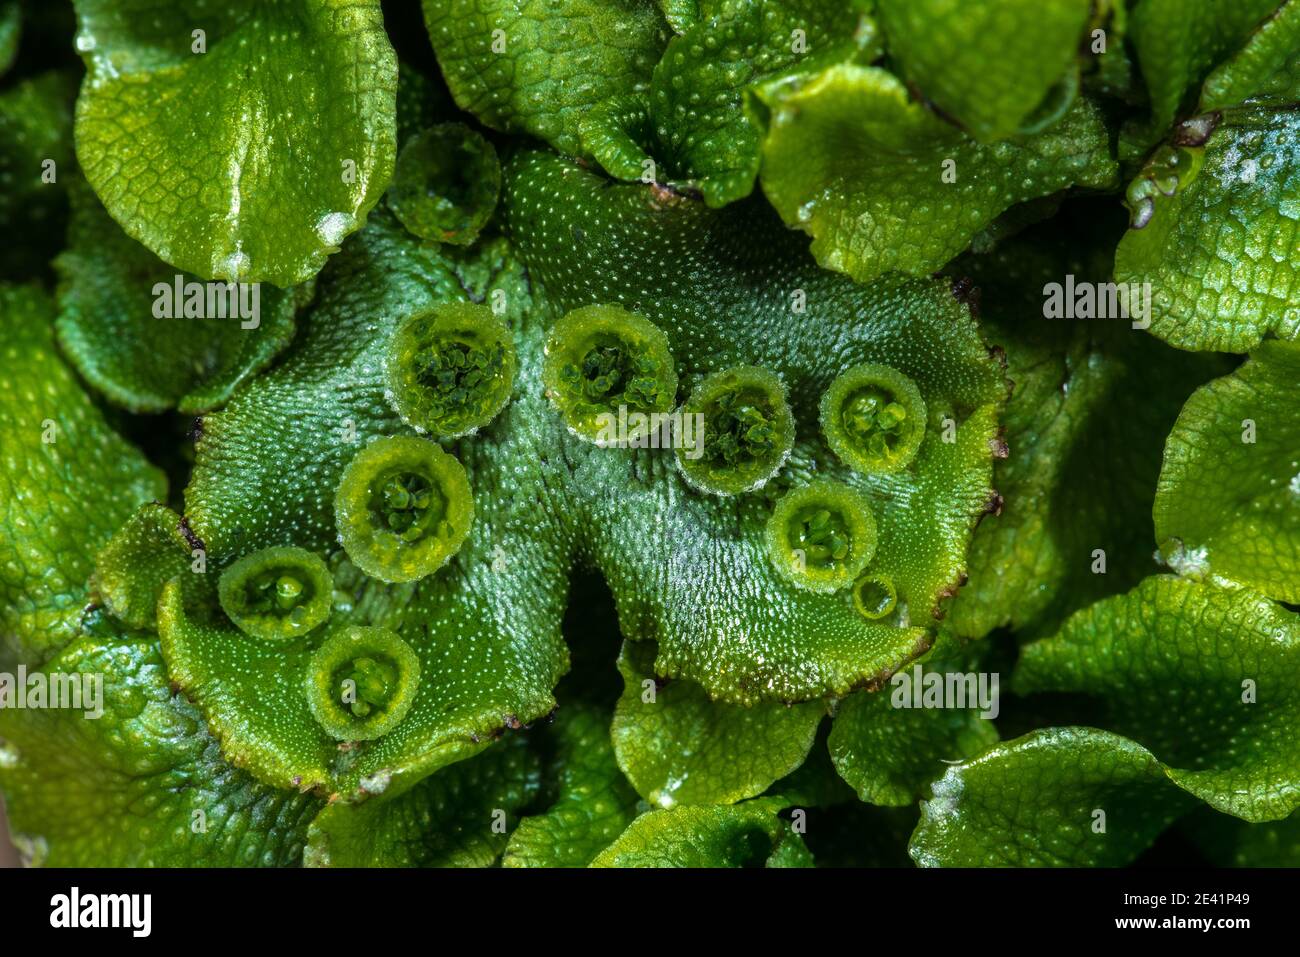 Marchantia polymorpha Moss with Gemma Cups Stock Photo